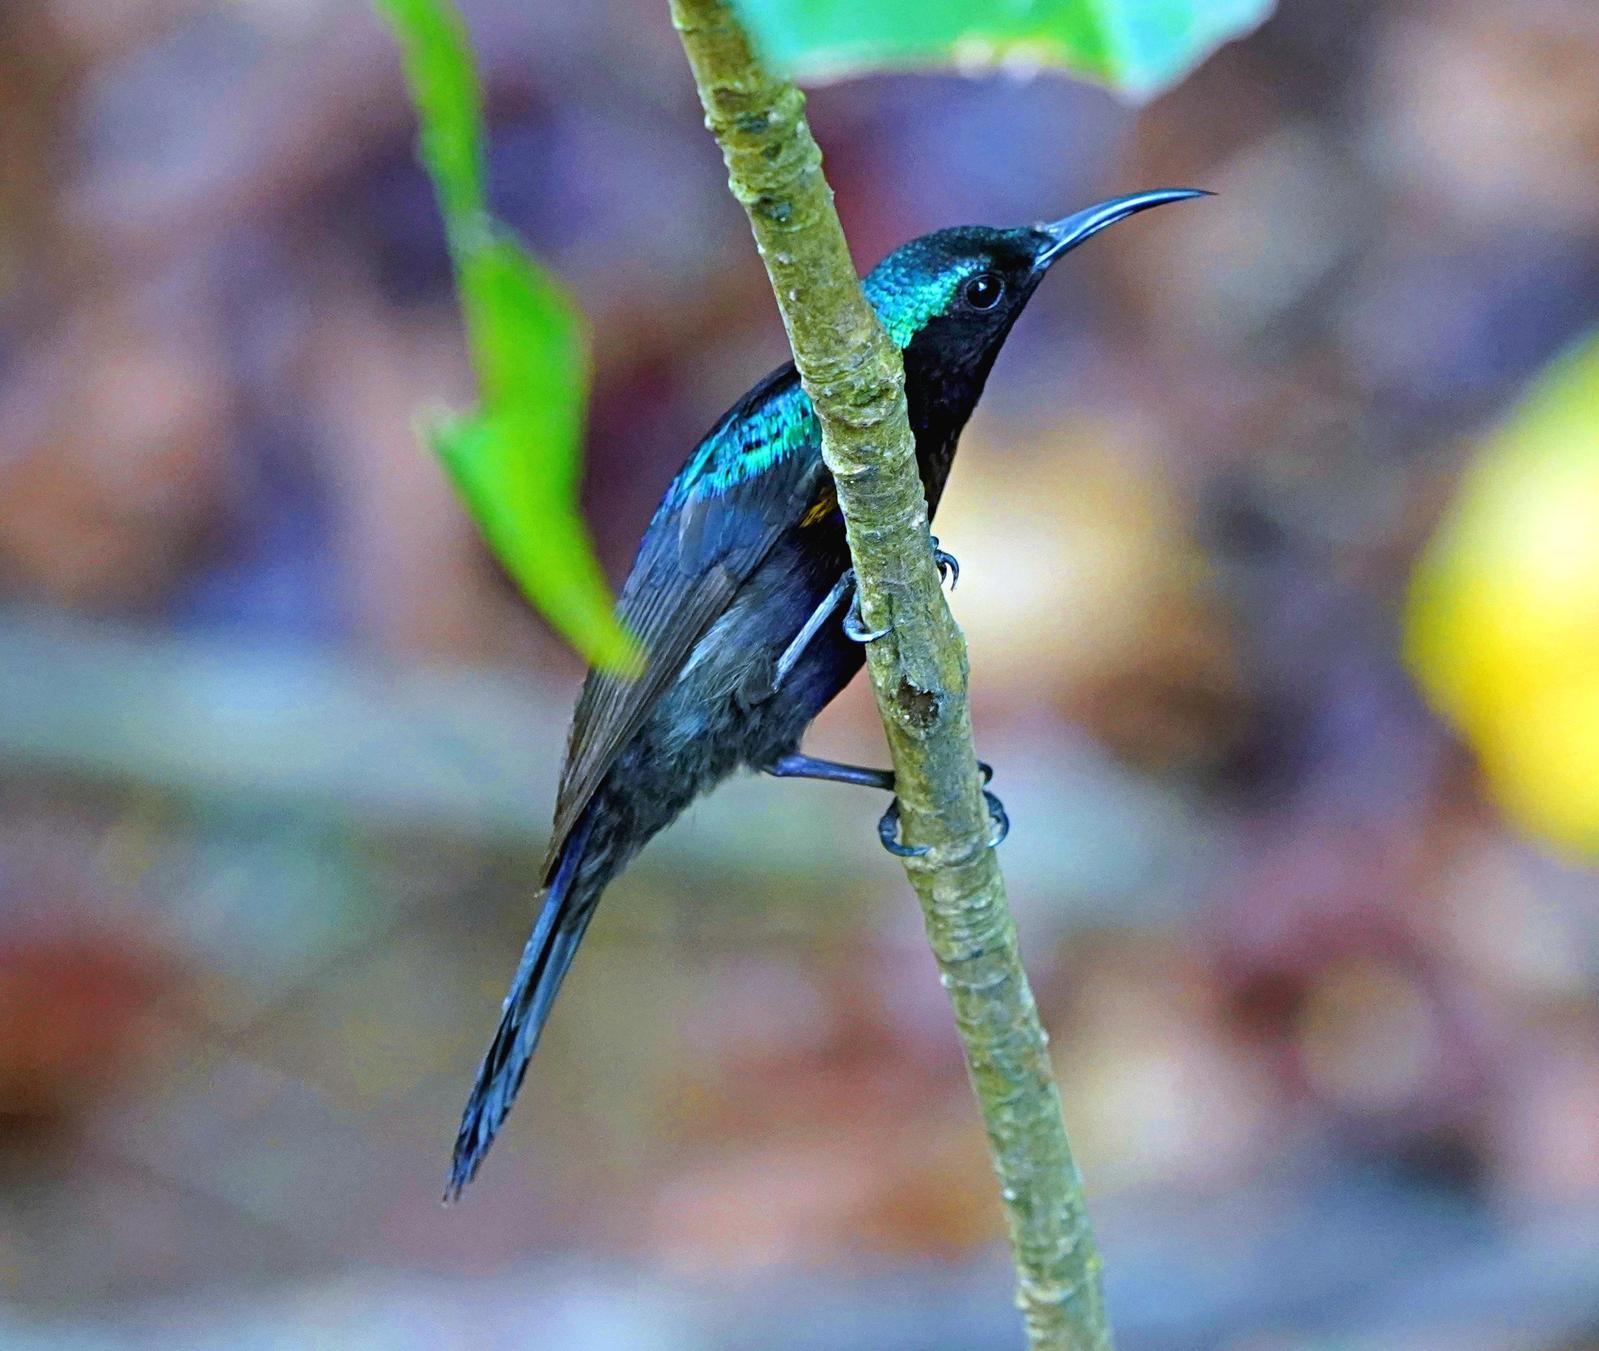 Copper-throated Sunbird Photo by Steven Cheong